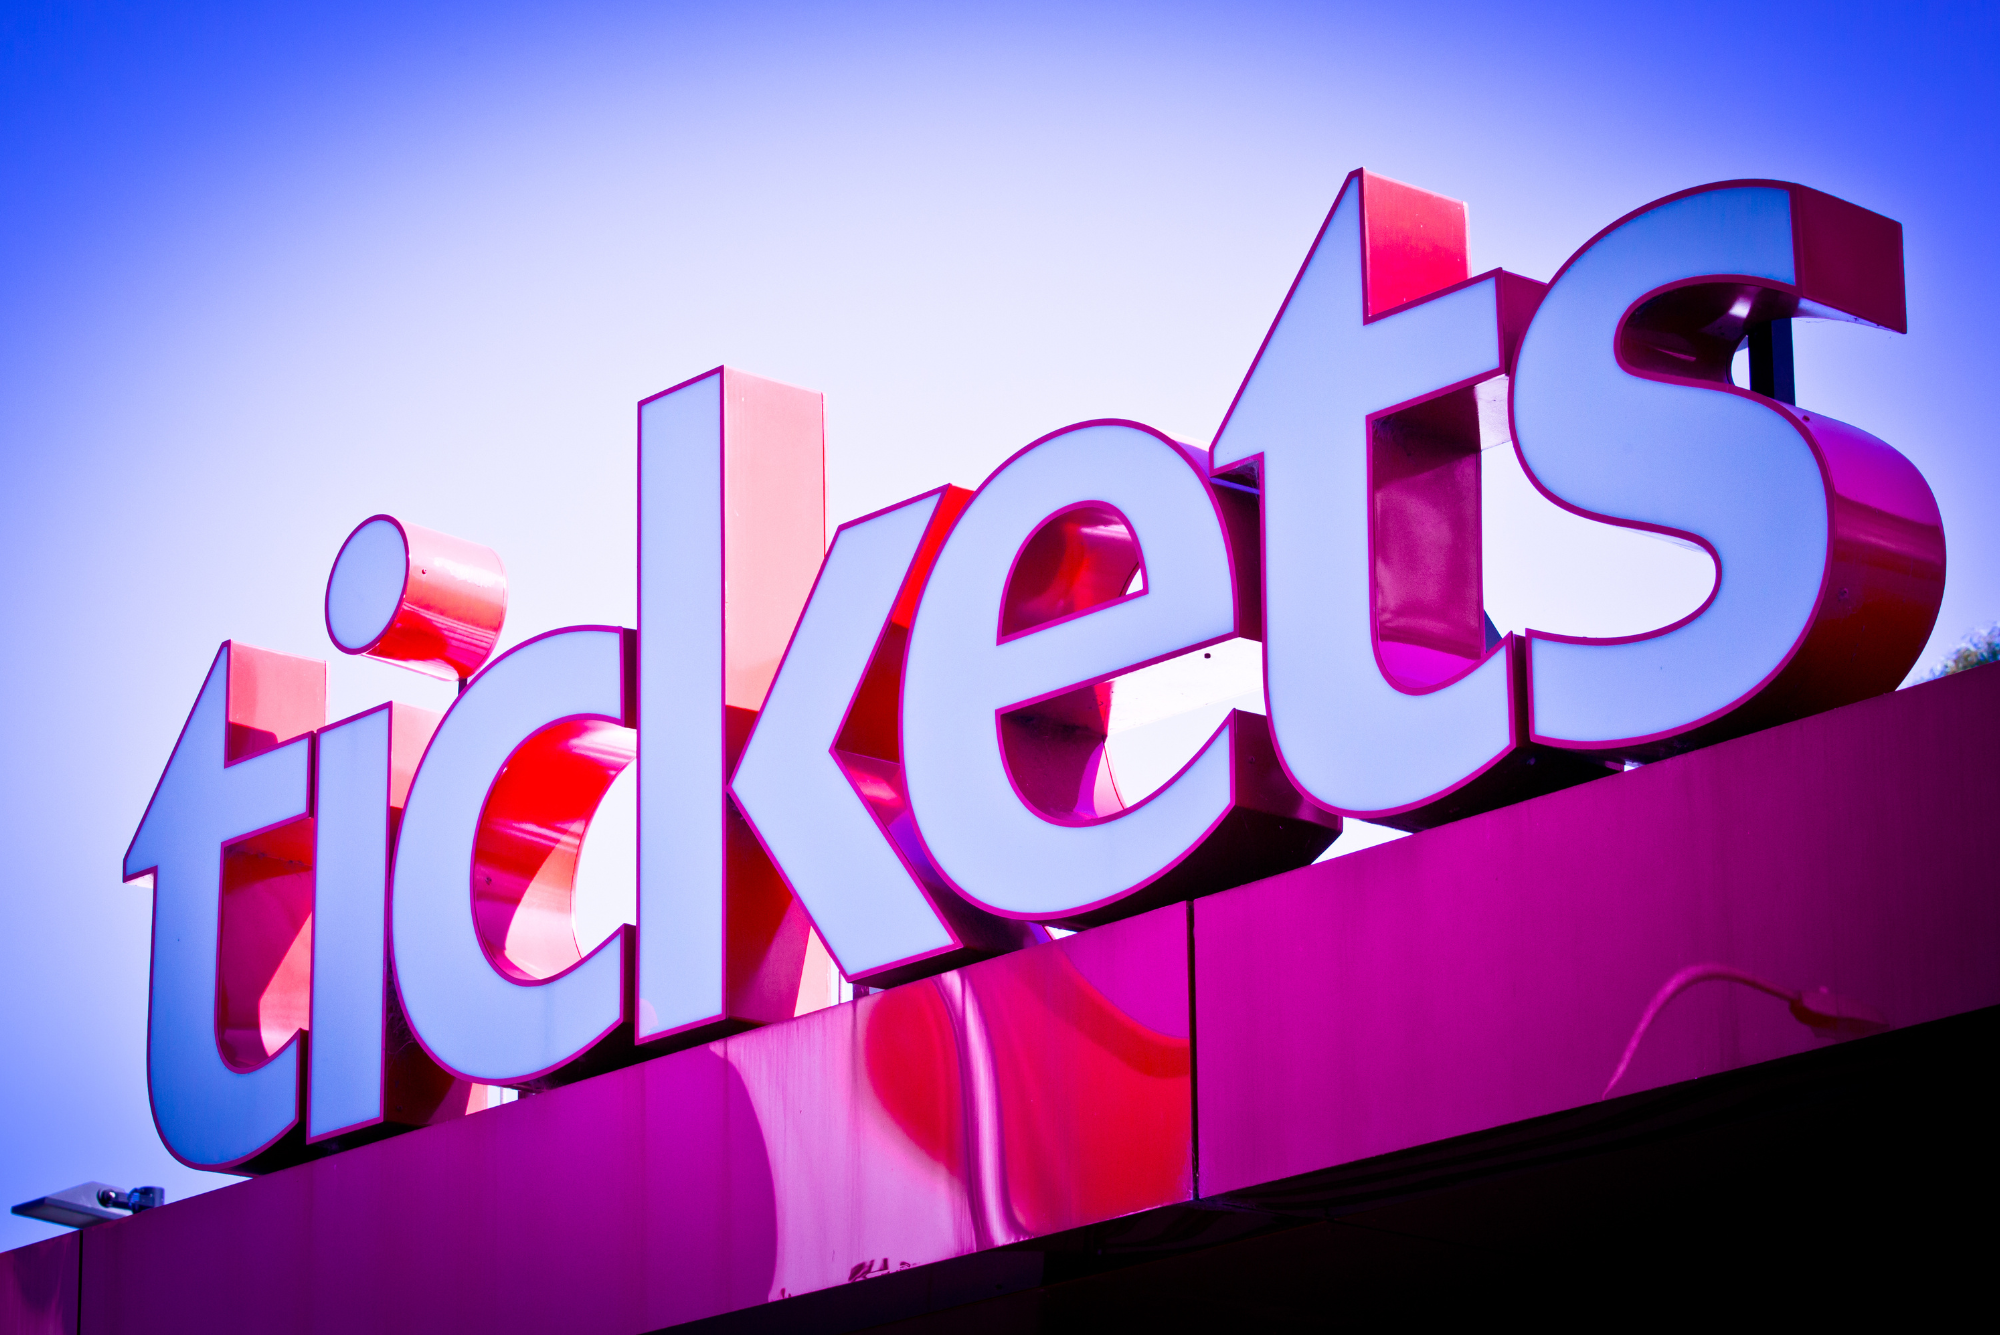 A large red and white sign that says "Tickets", in front of a blue sky.